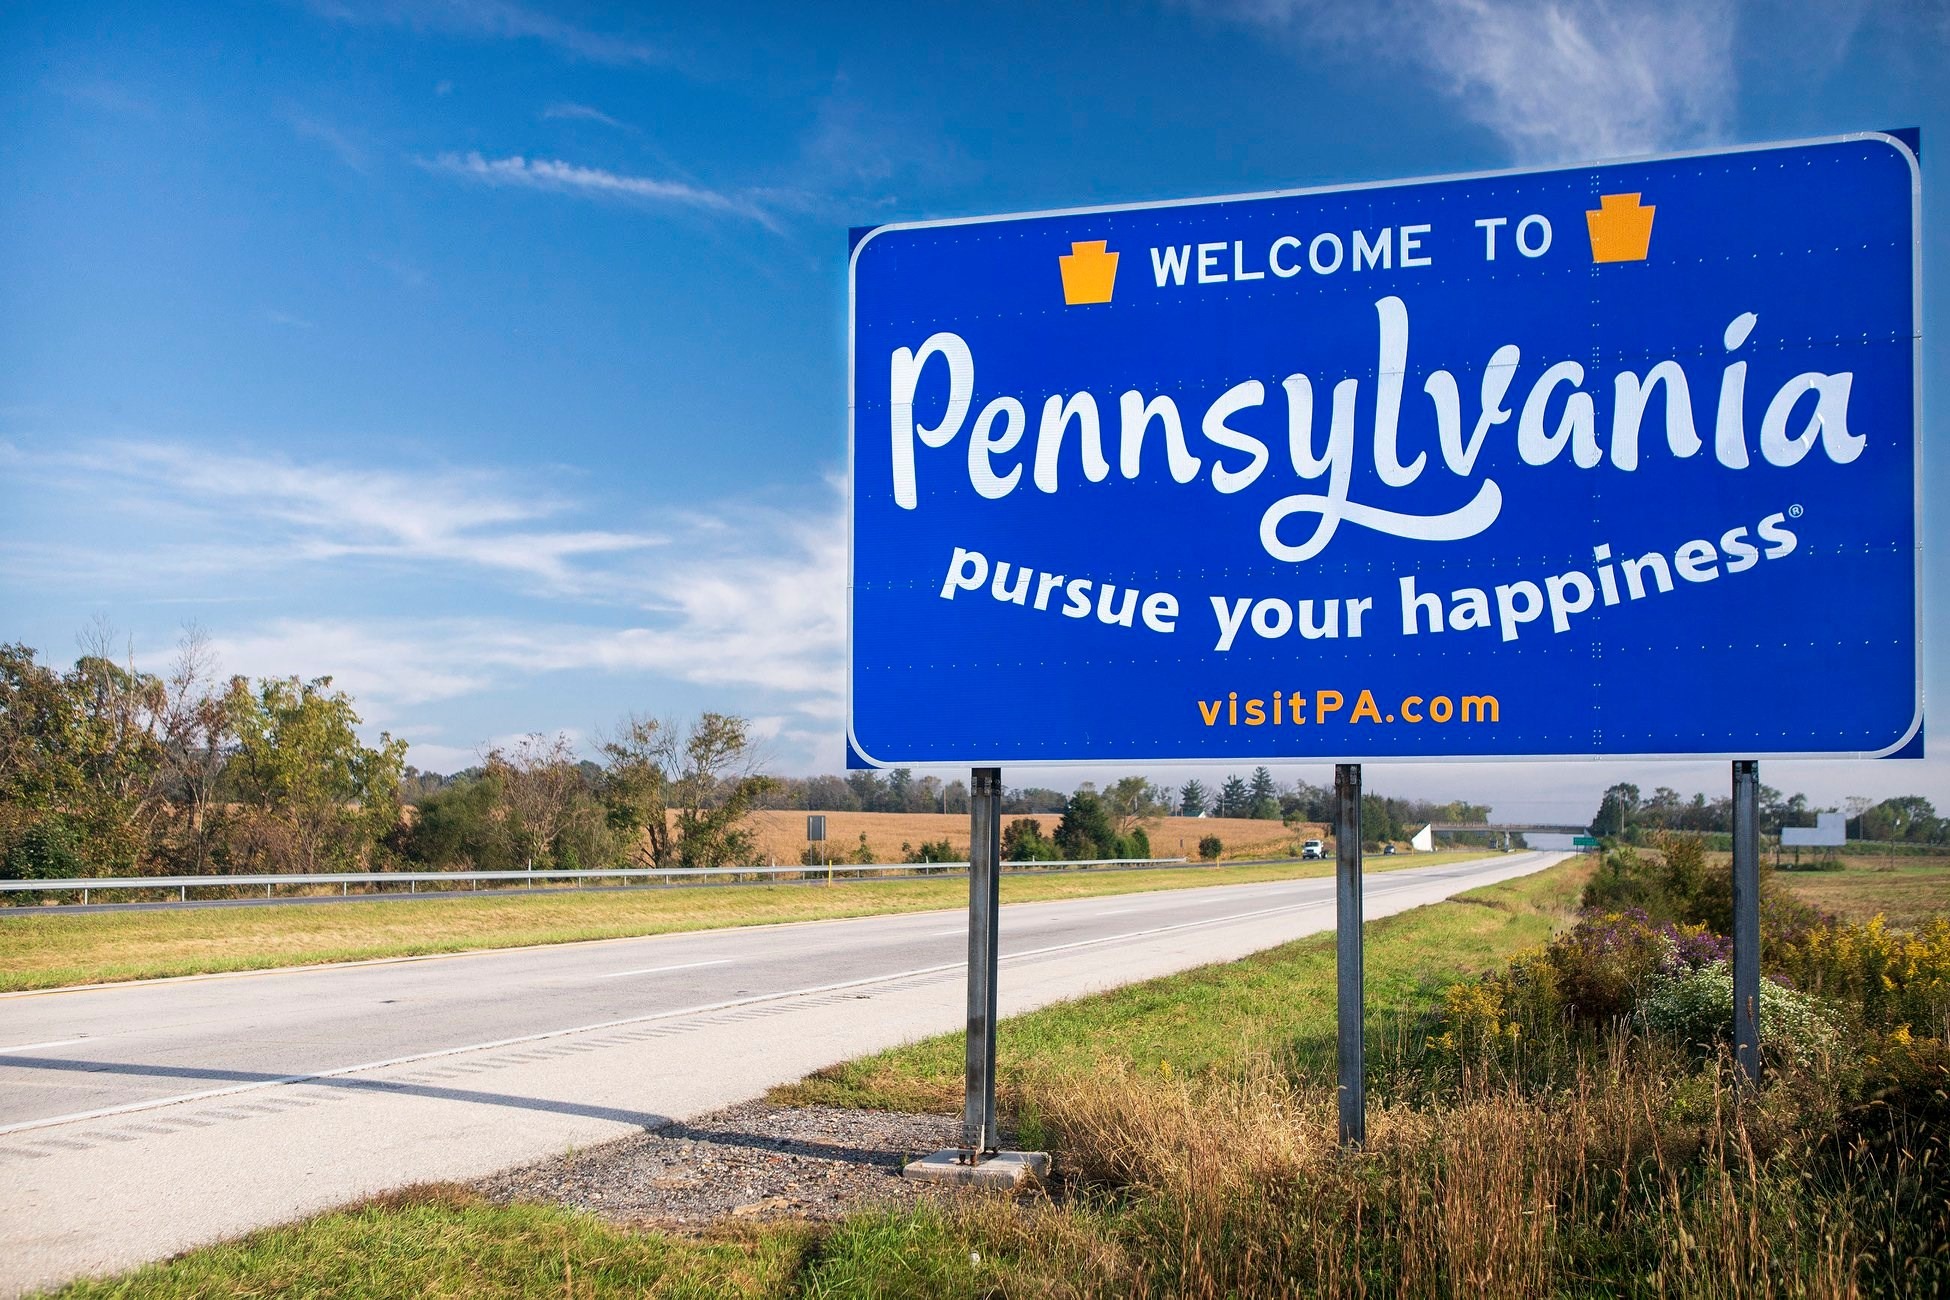 GGPoker Gets Licensed in Pennsylvania, Won’t Reveal Its Hand Just Yet